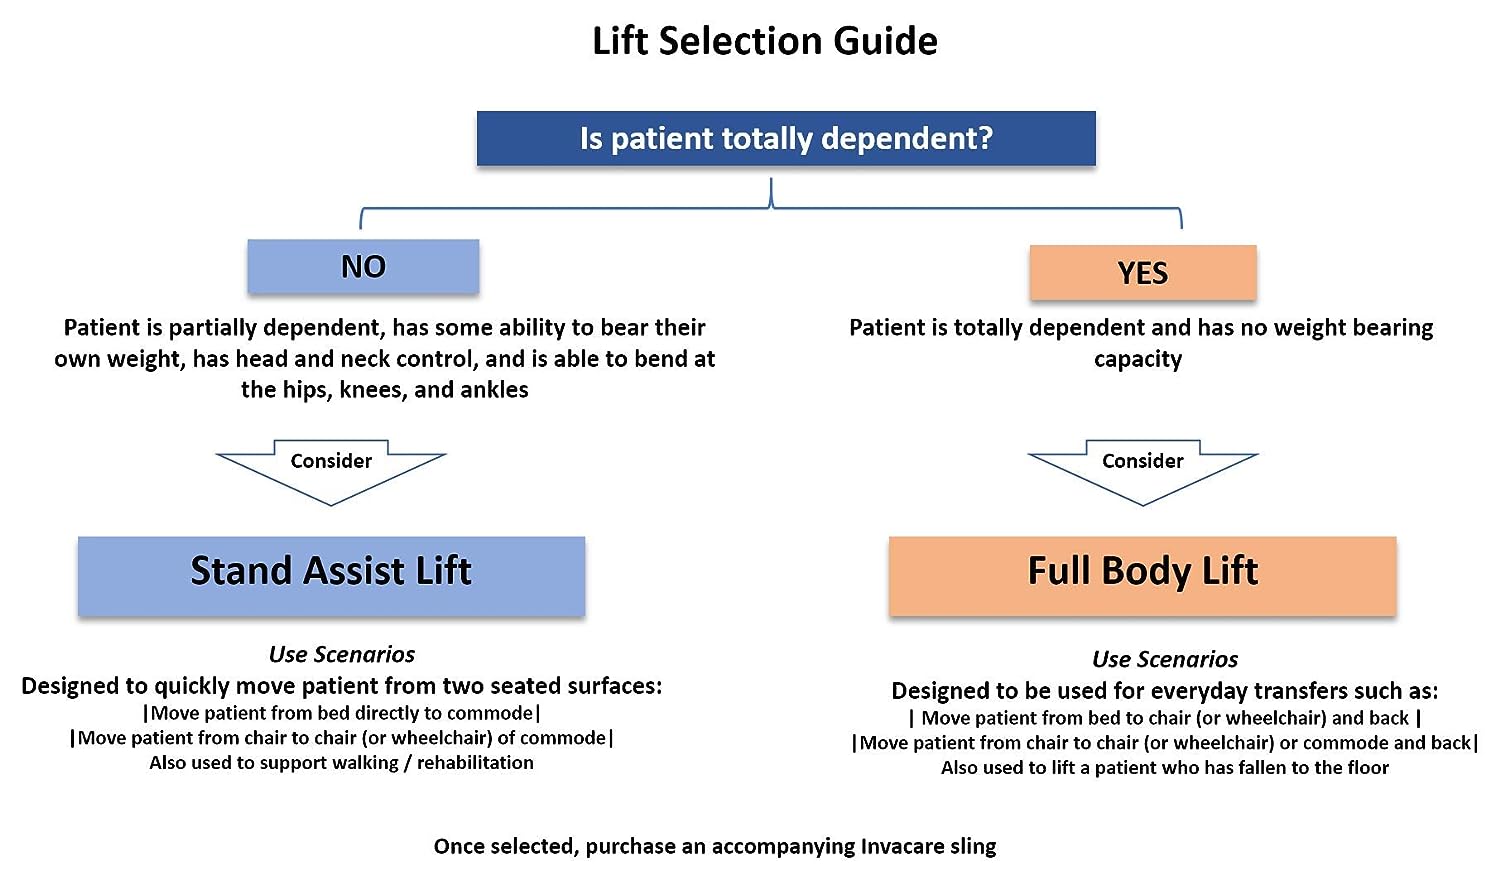 An informational sheet providing information to help choose the appropriate lift between a stand assist lift or a full body lift.